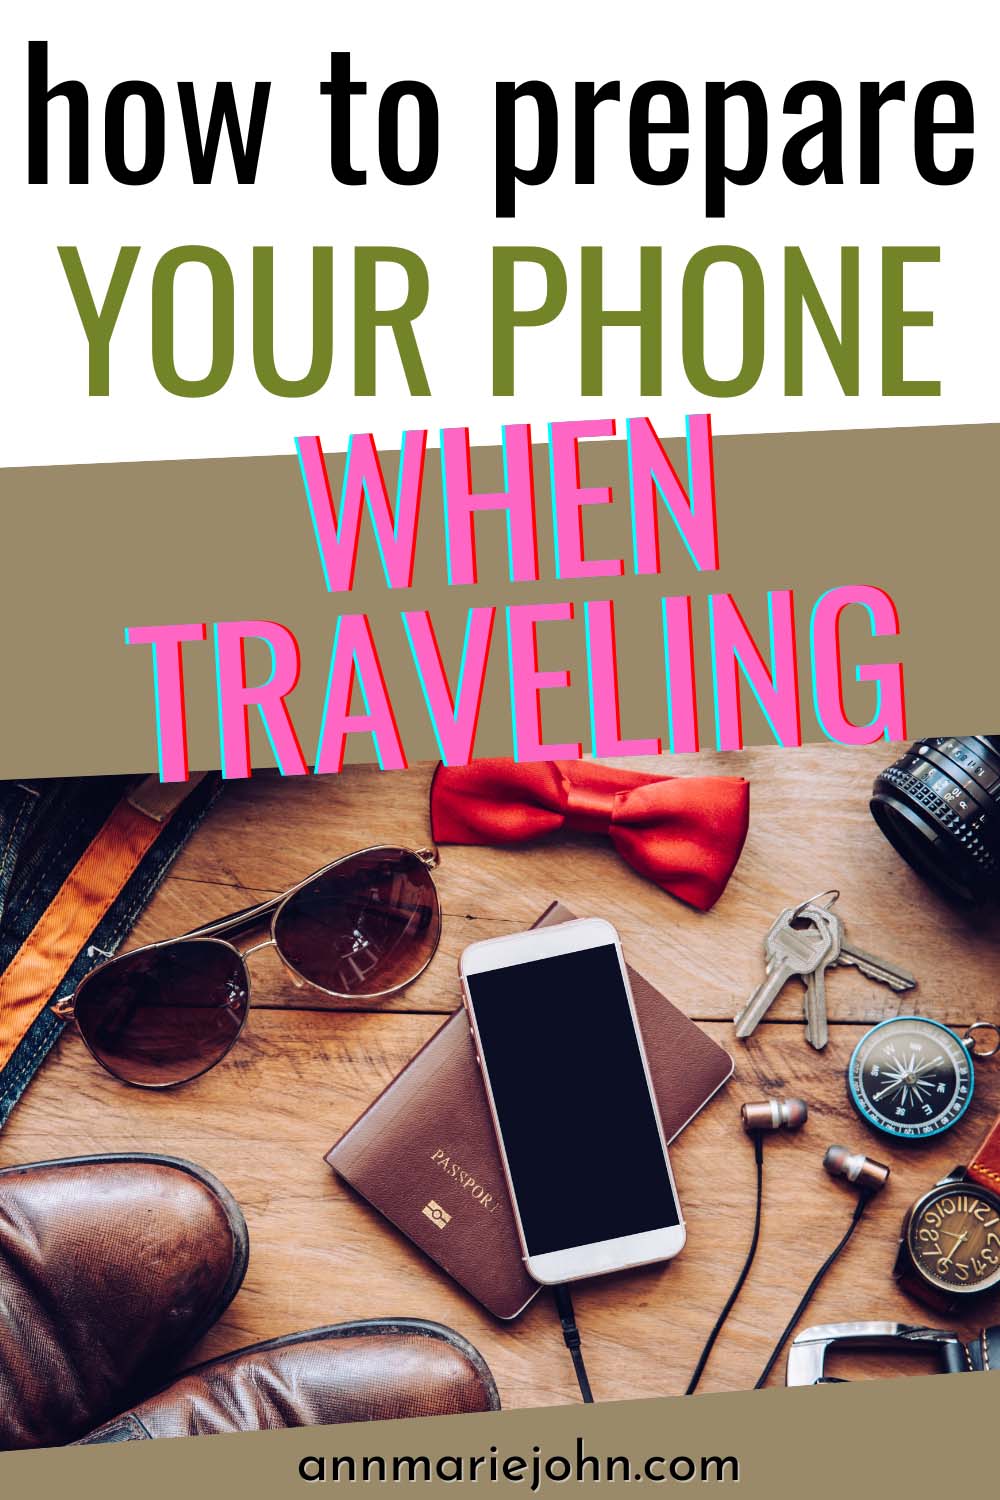 How To Prepare Your Phone When Traveling